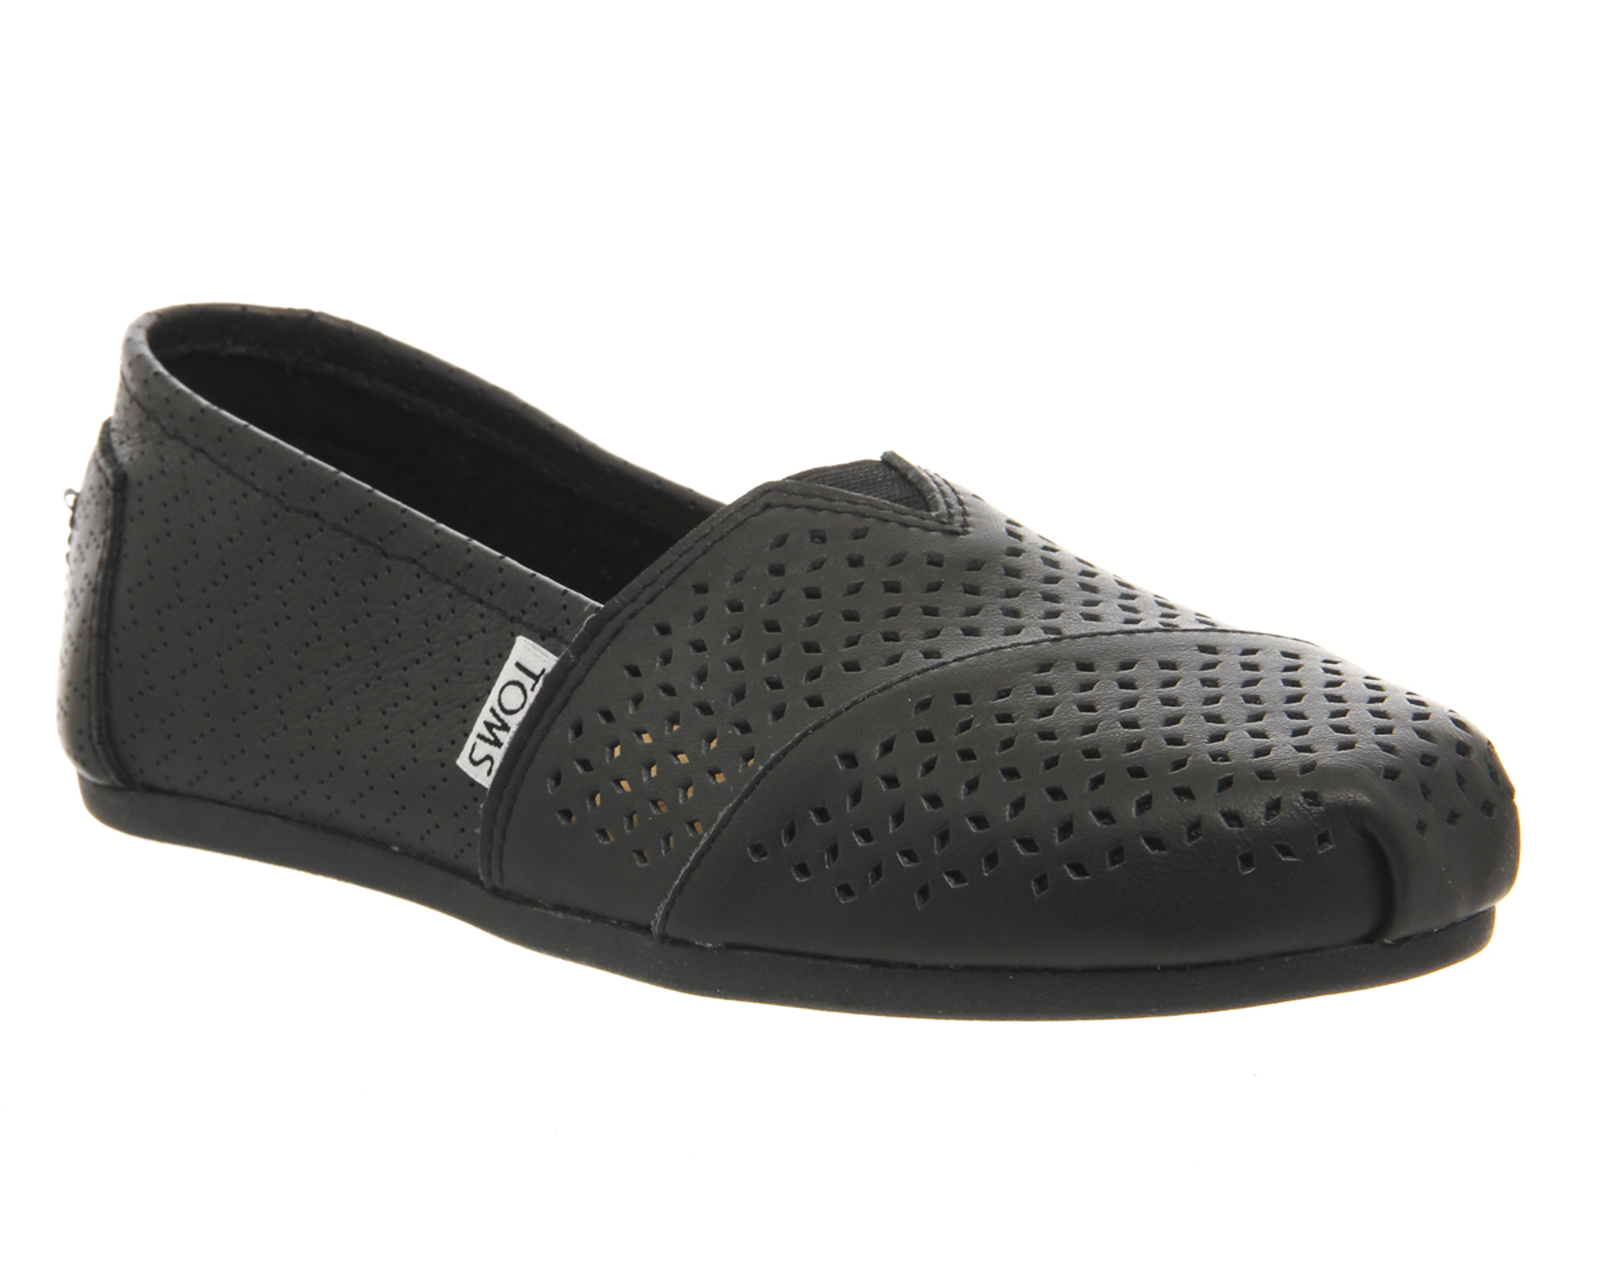 toms black leather shoes